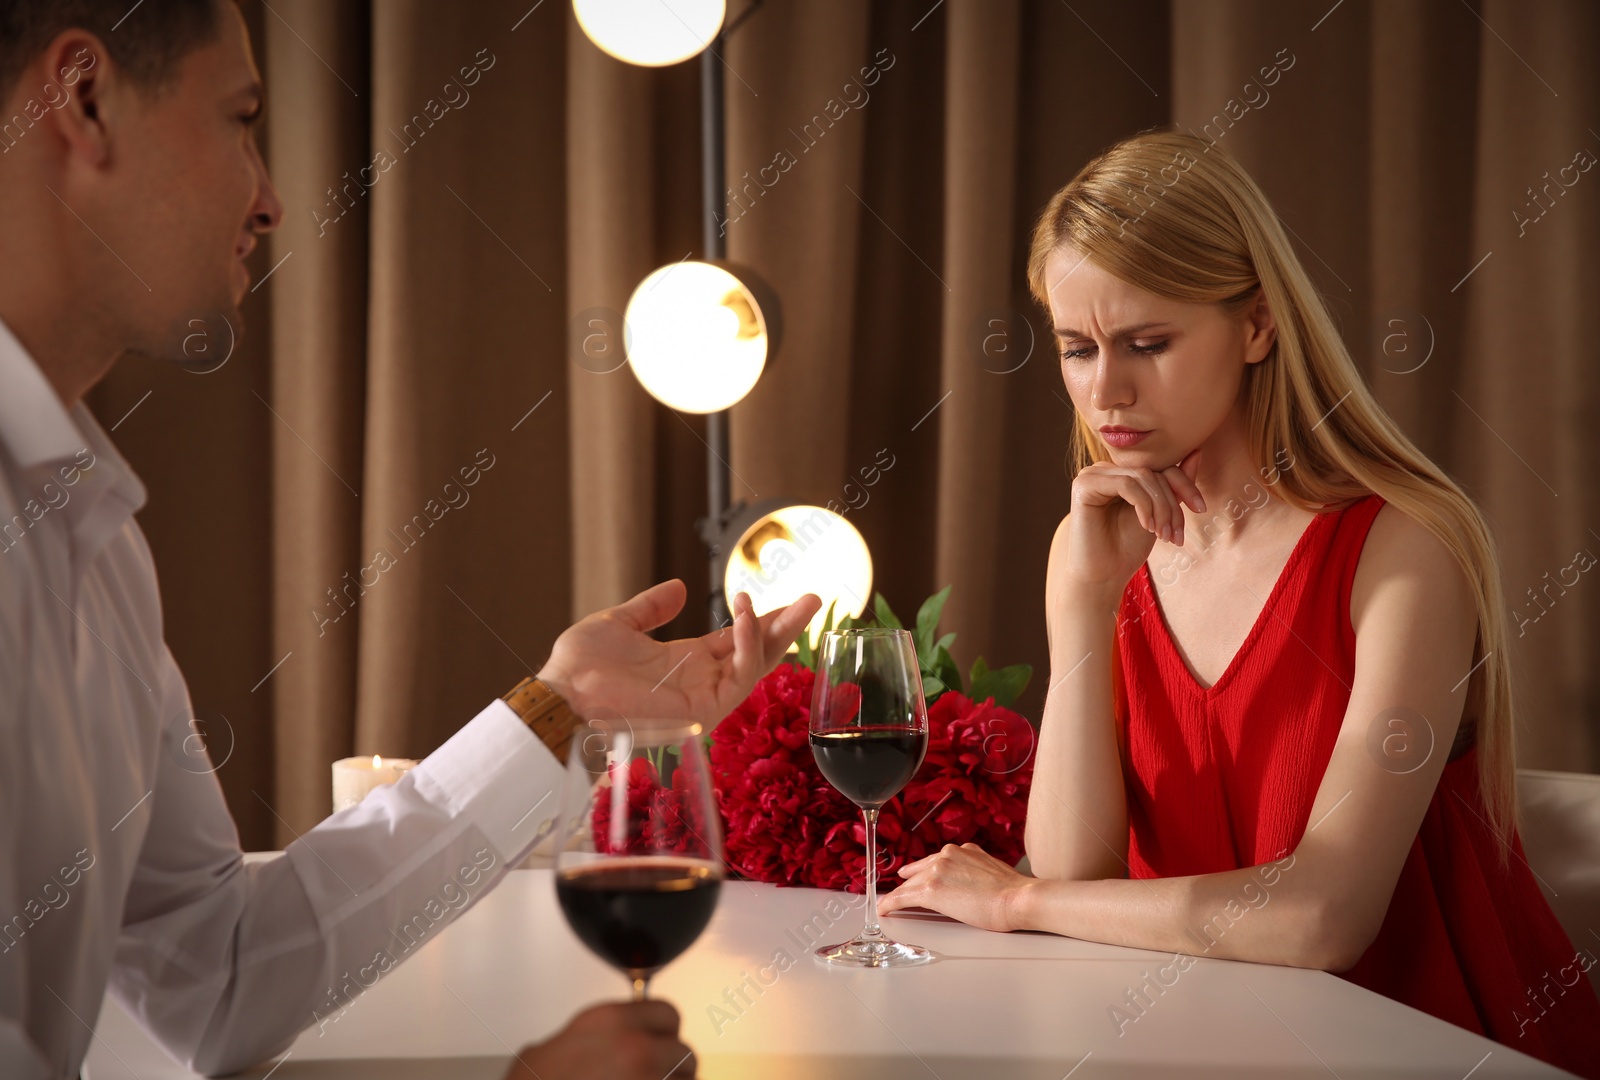 Photo of Displeased young woman and overtalkative man in restaurant. Failed first date